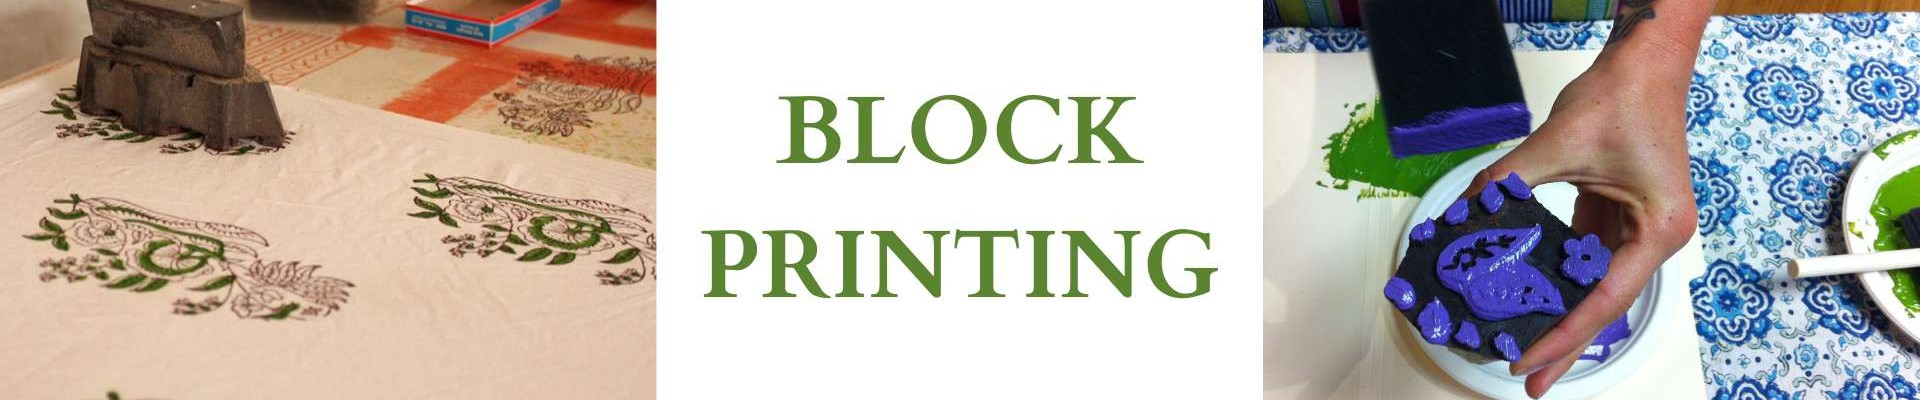 Block Printing on Fabric in India - Introduction, History, Process, Art, Design